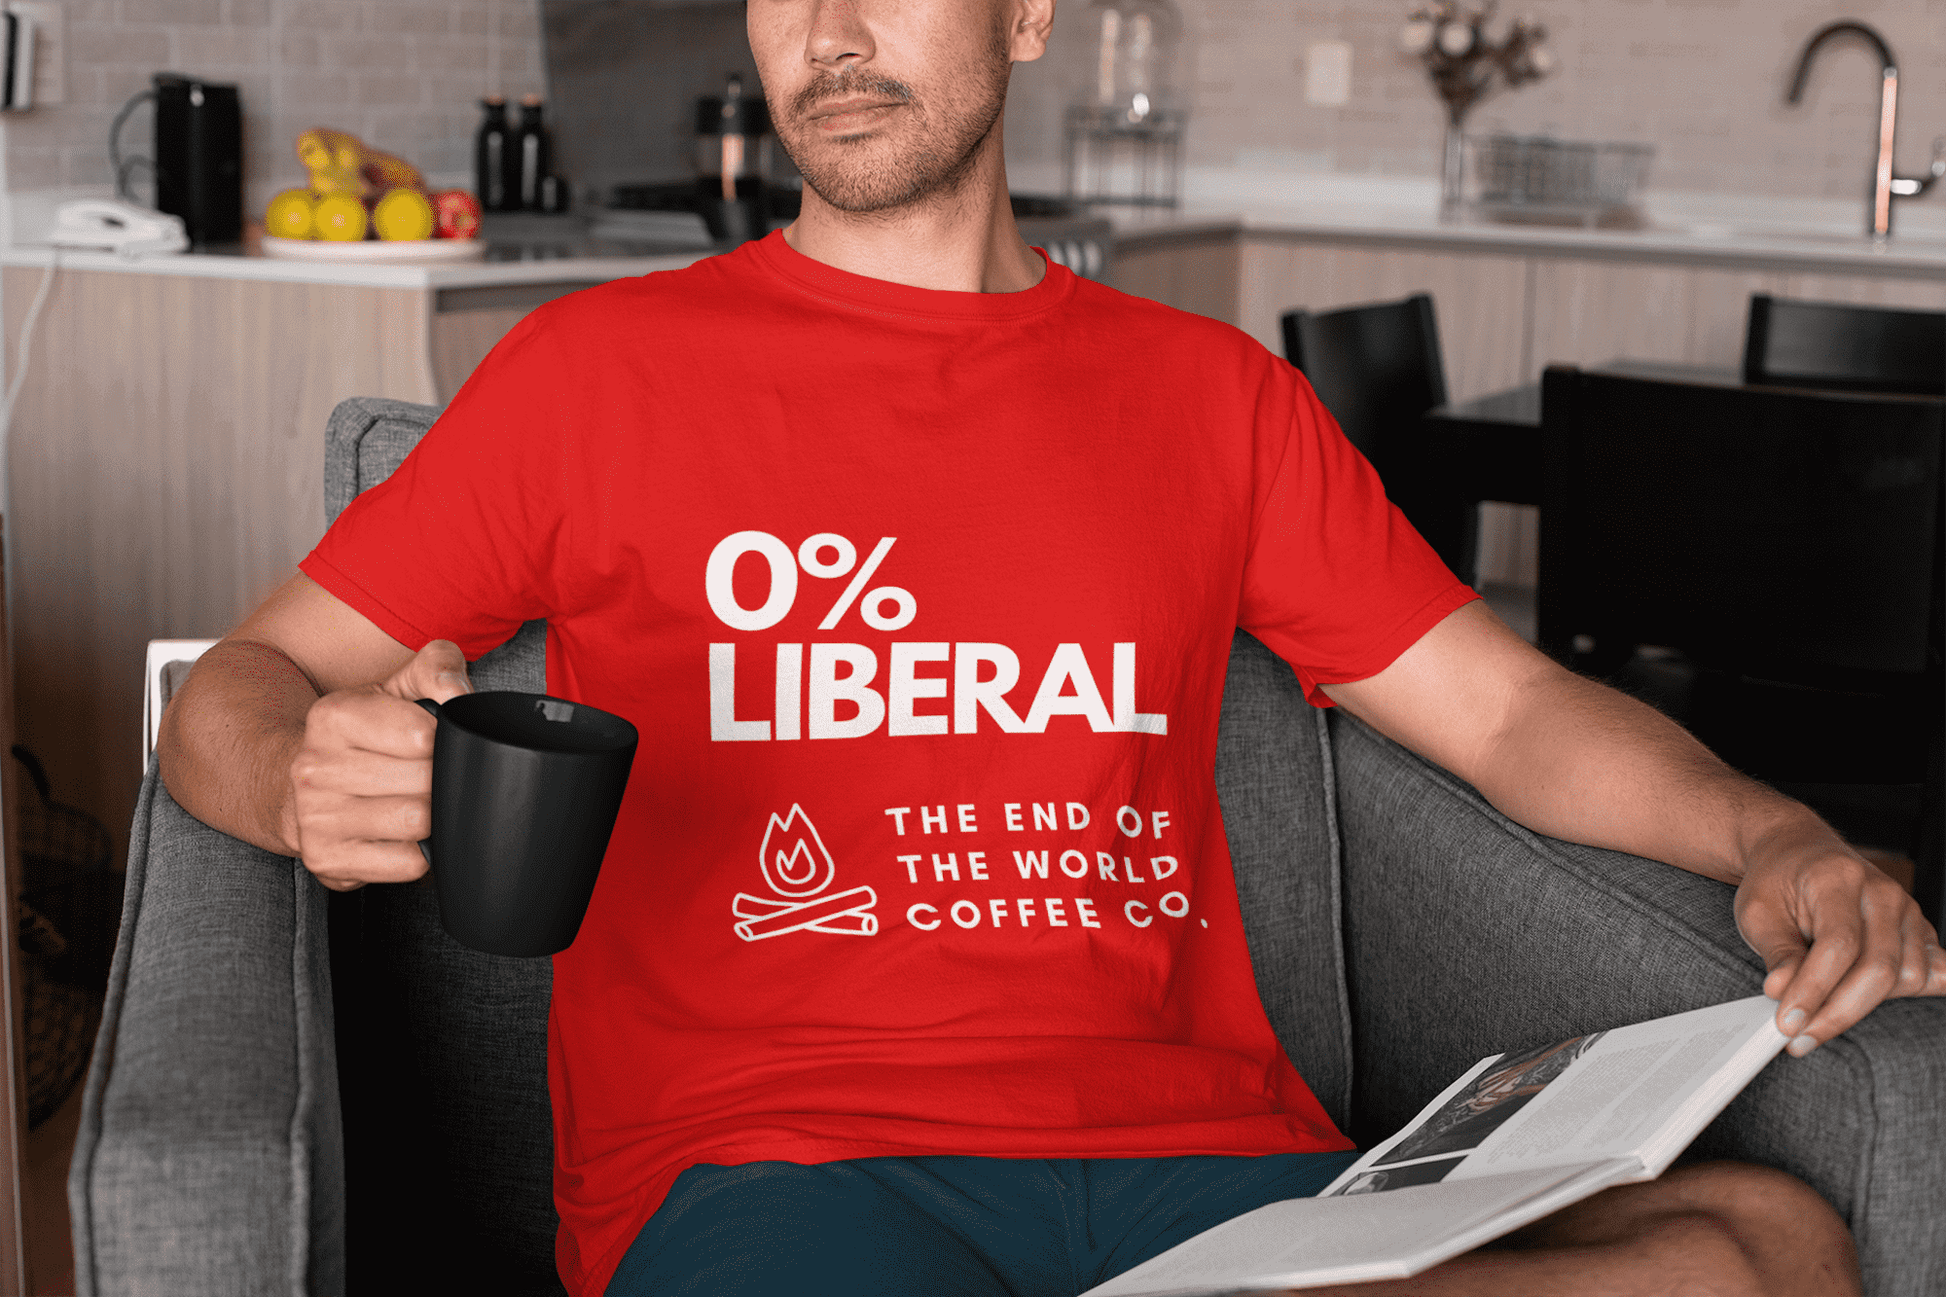 0% Liberal T-Shirt by The End of The World Coffee Co.